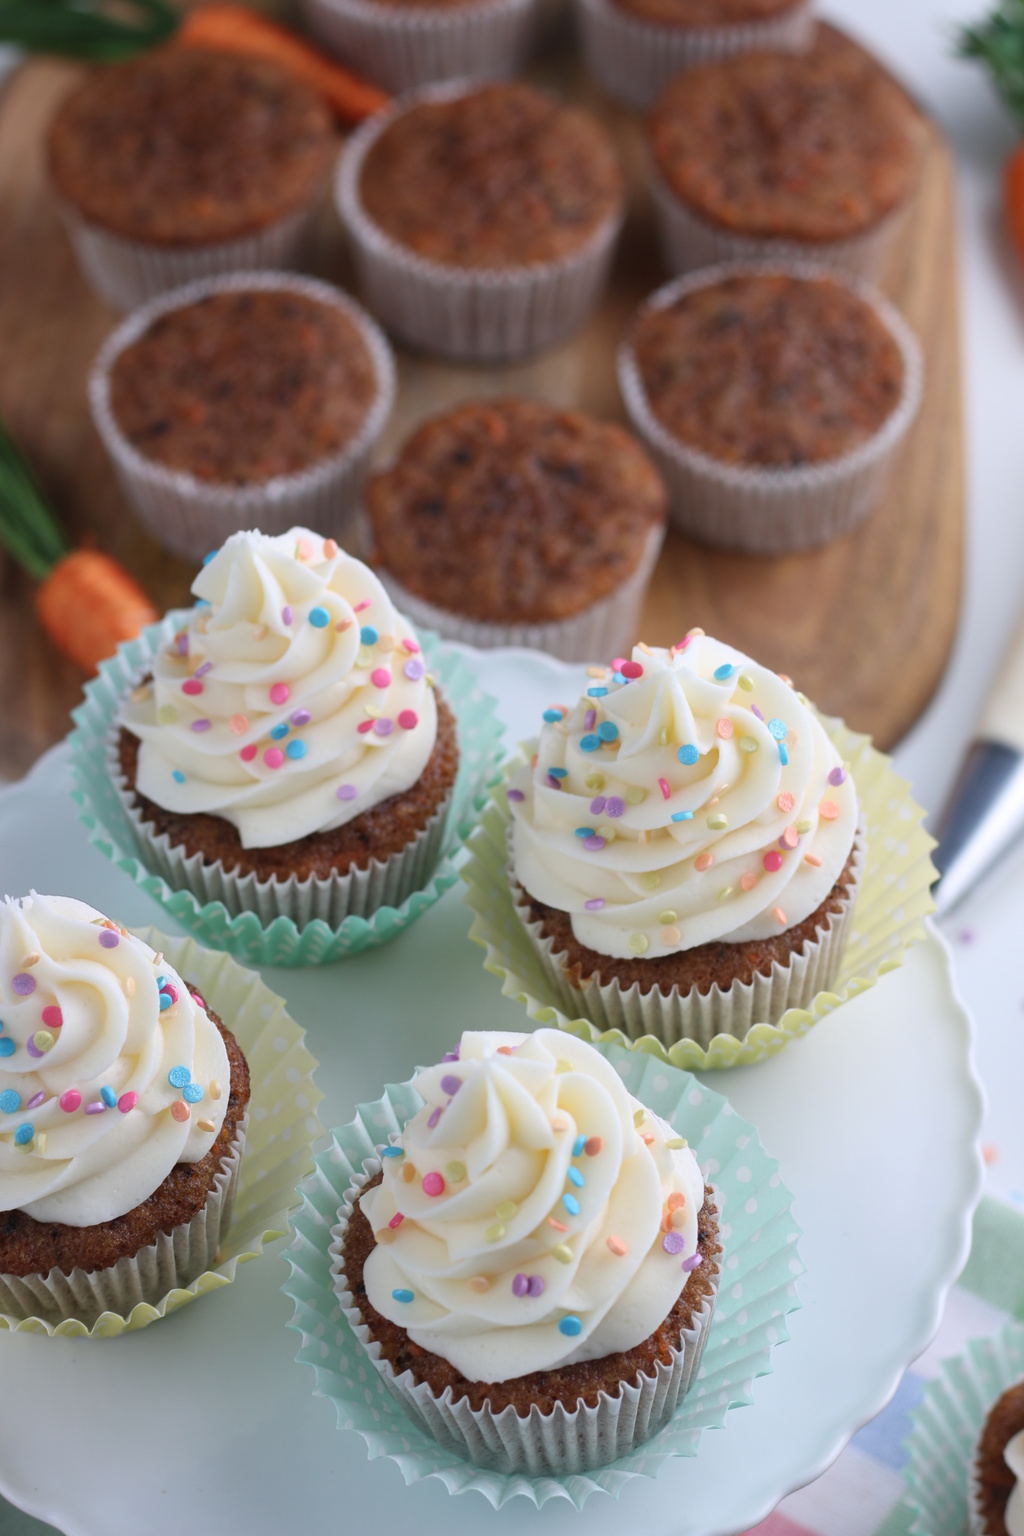 Carrot Cake Cupcakes and homemade frosting